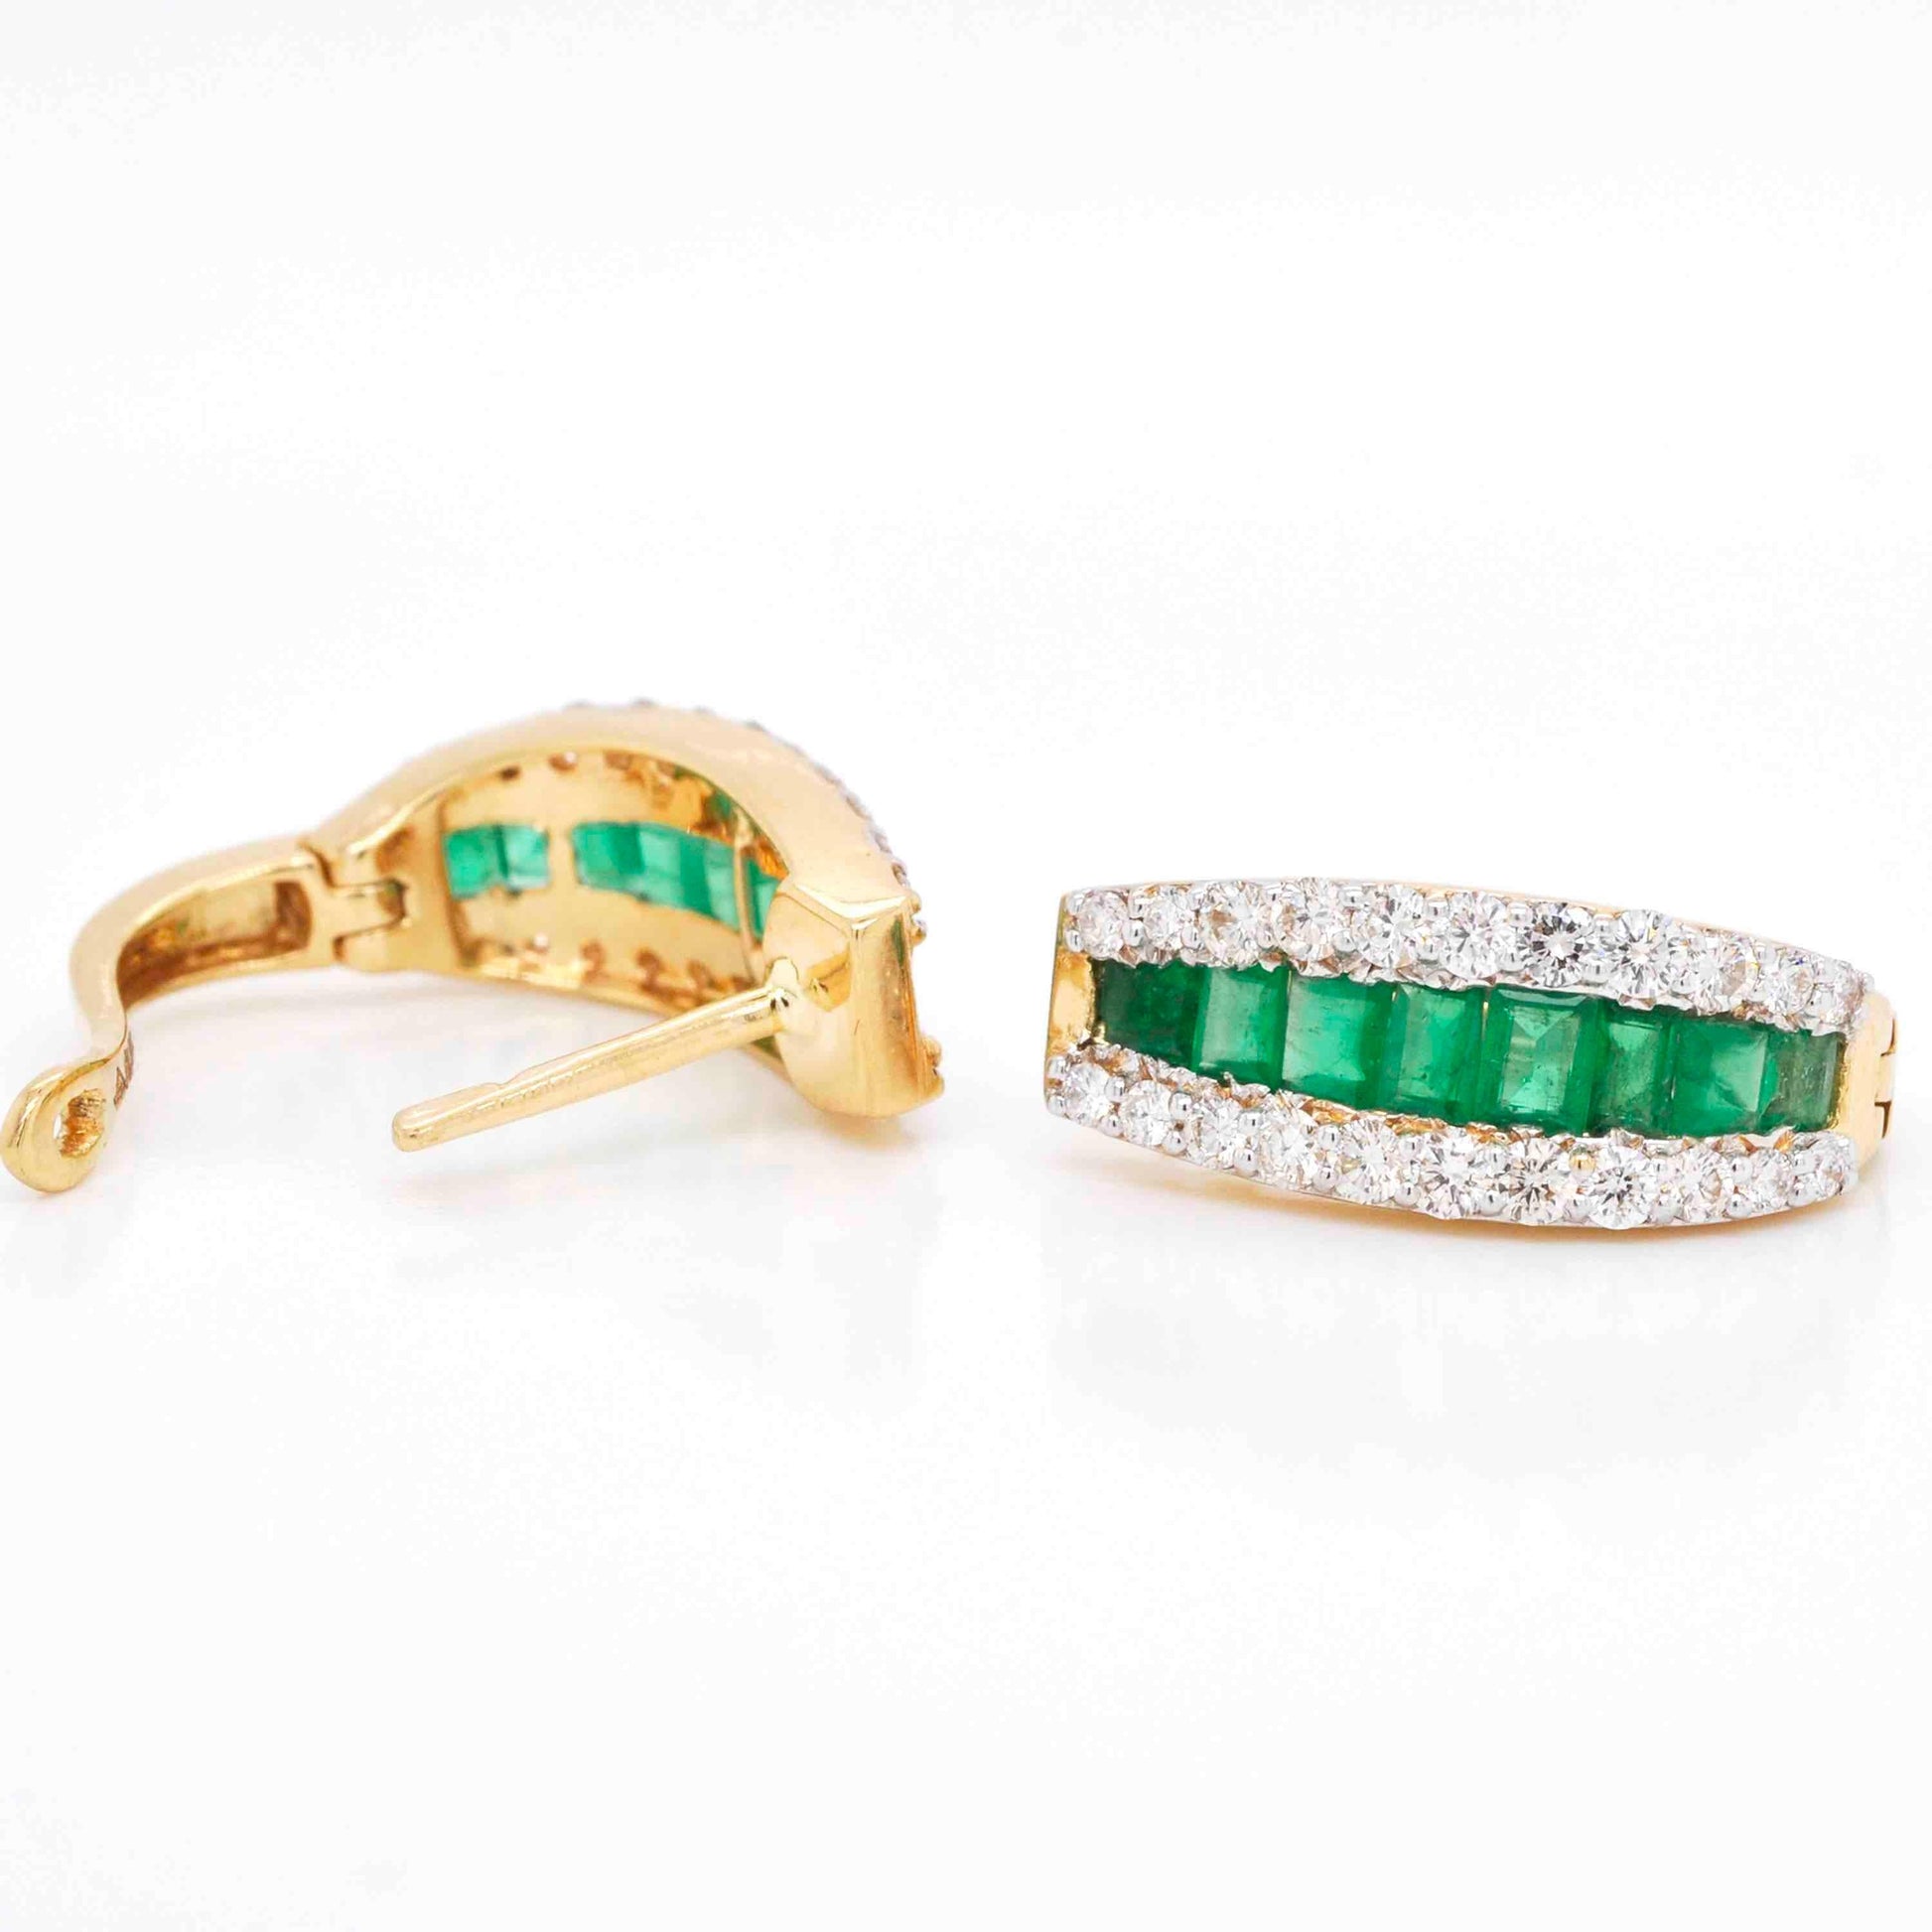 green gemstone hoops earring with gold